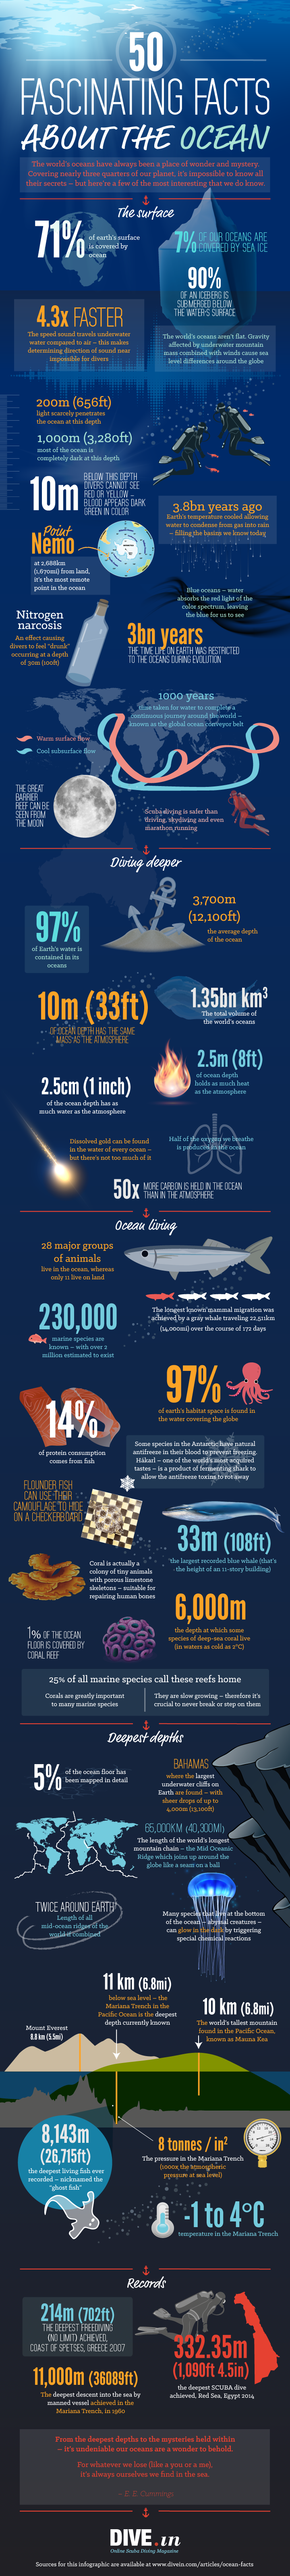 0 Fascinating Facts about the Ocean